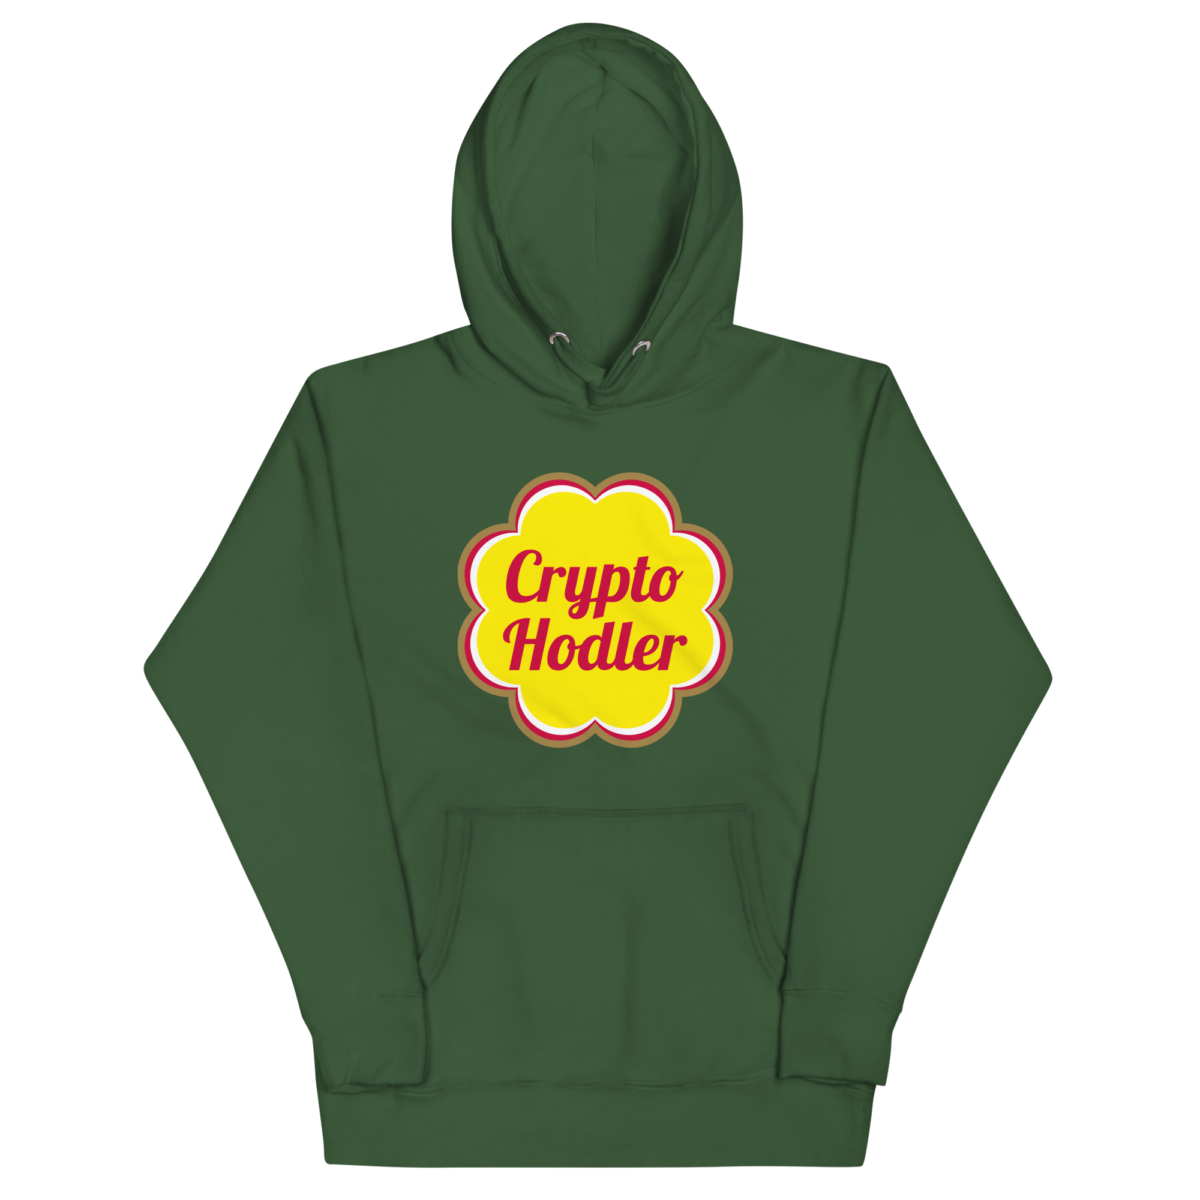 unisex premium hoodie forest green front 6357a8b800ea0 - Crypto Hodler Hoodie